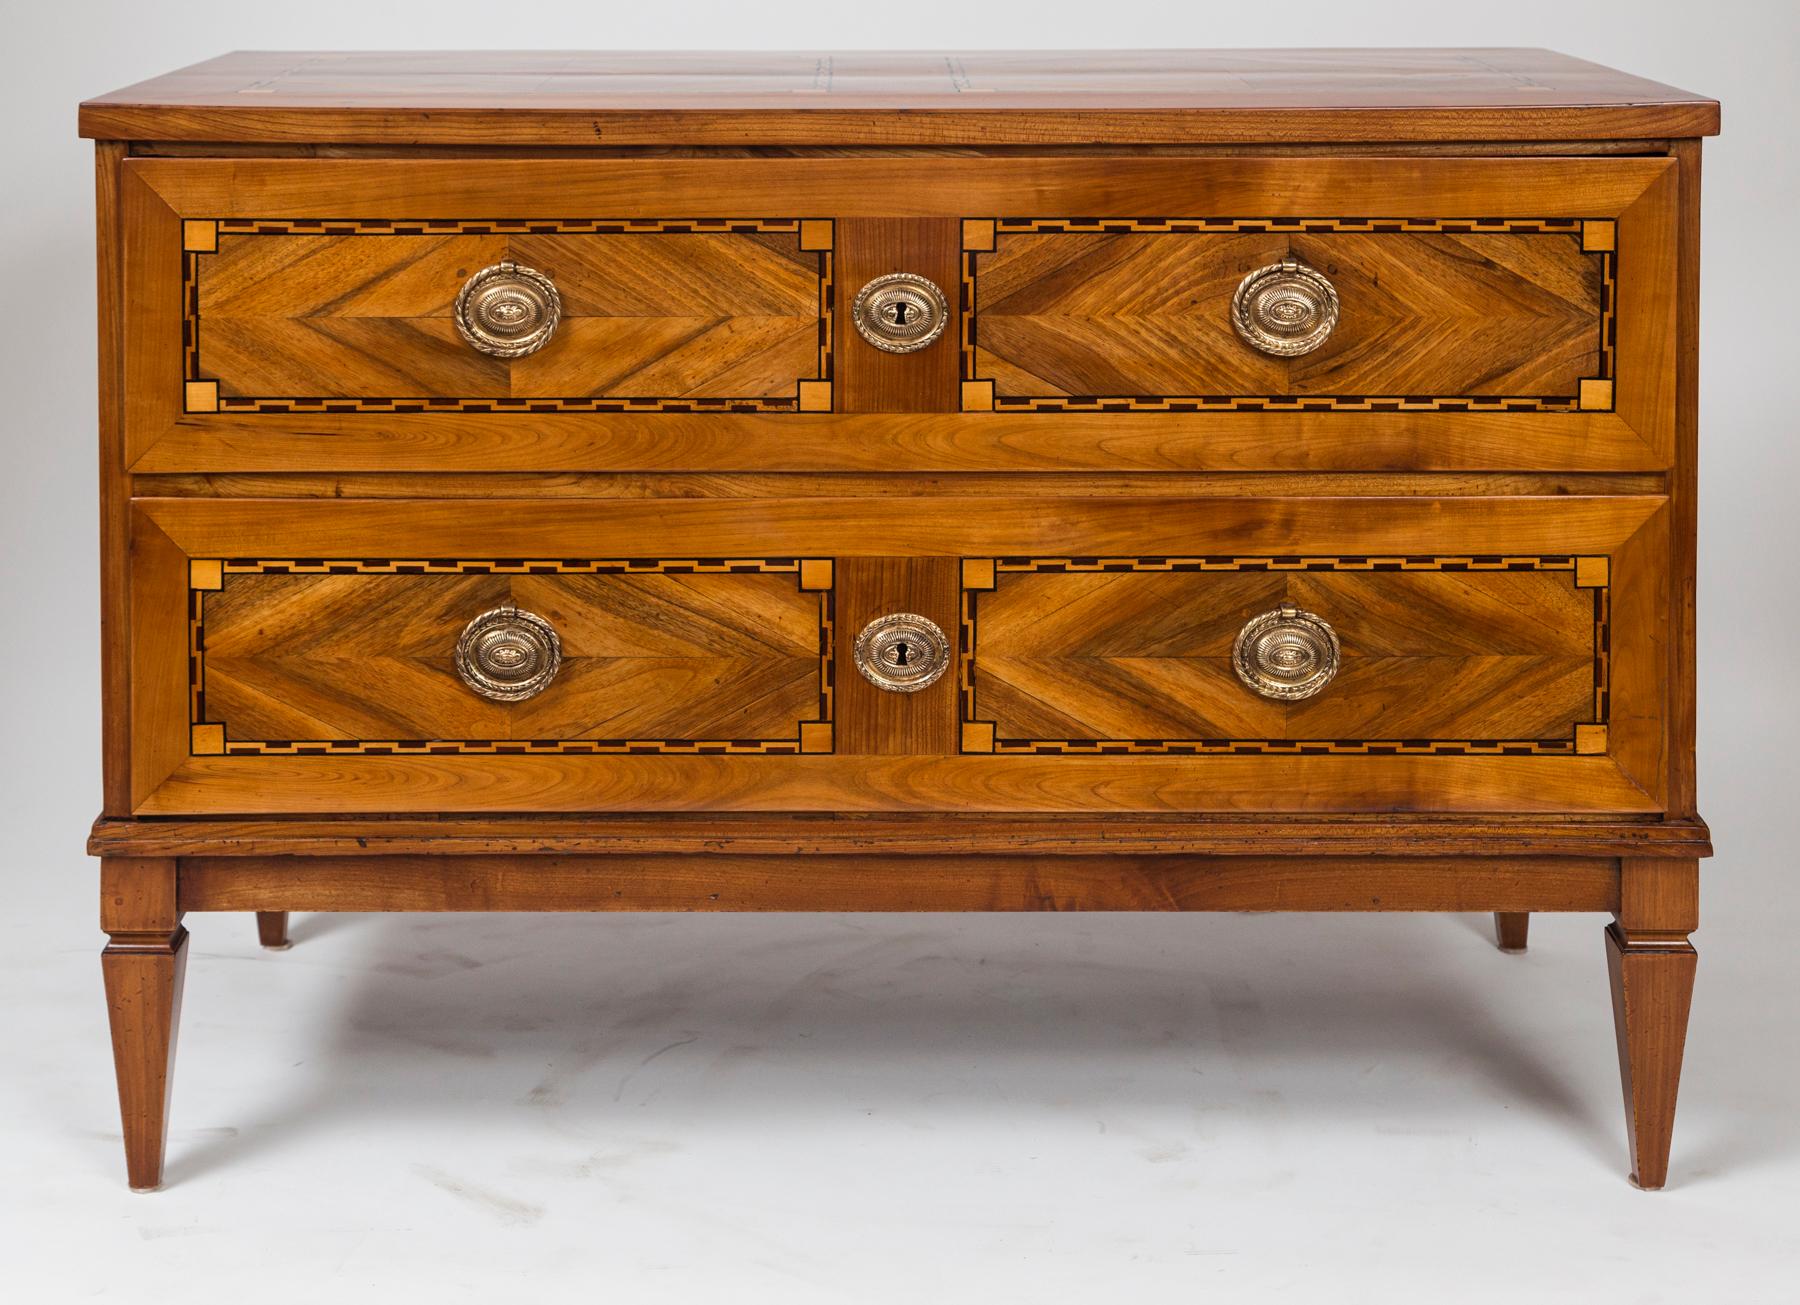 A handsome Neoclassical geometric panelled cherry and walnut chest comprised of two long drawers opening with round brass pulls and finishing on straight and tapered legs.

Condition: Excellent antique condition, original carcass in re-polished